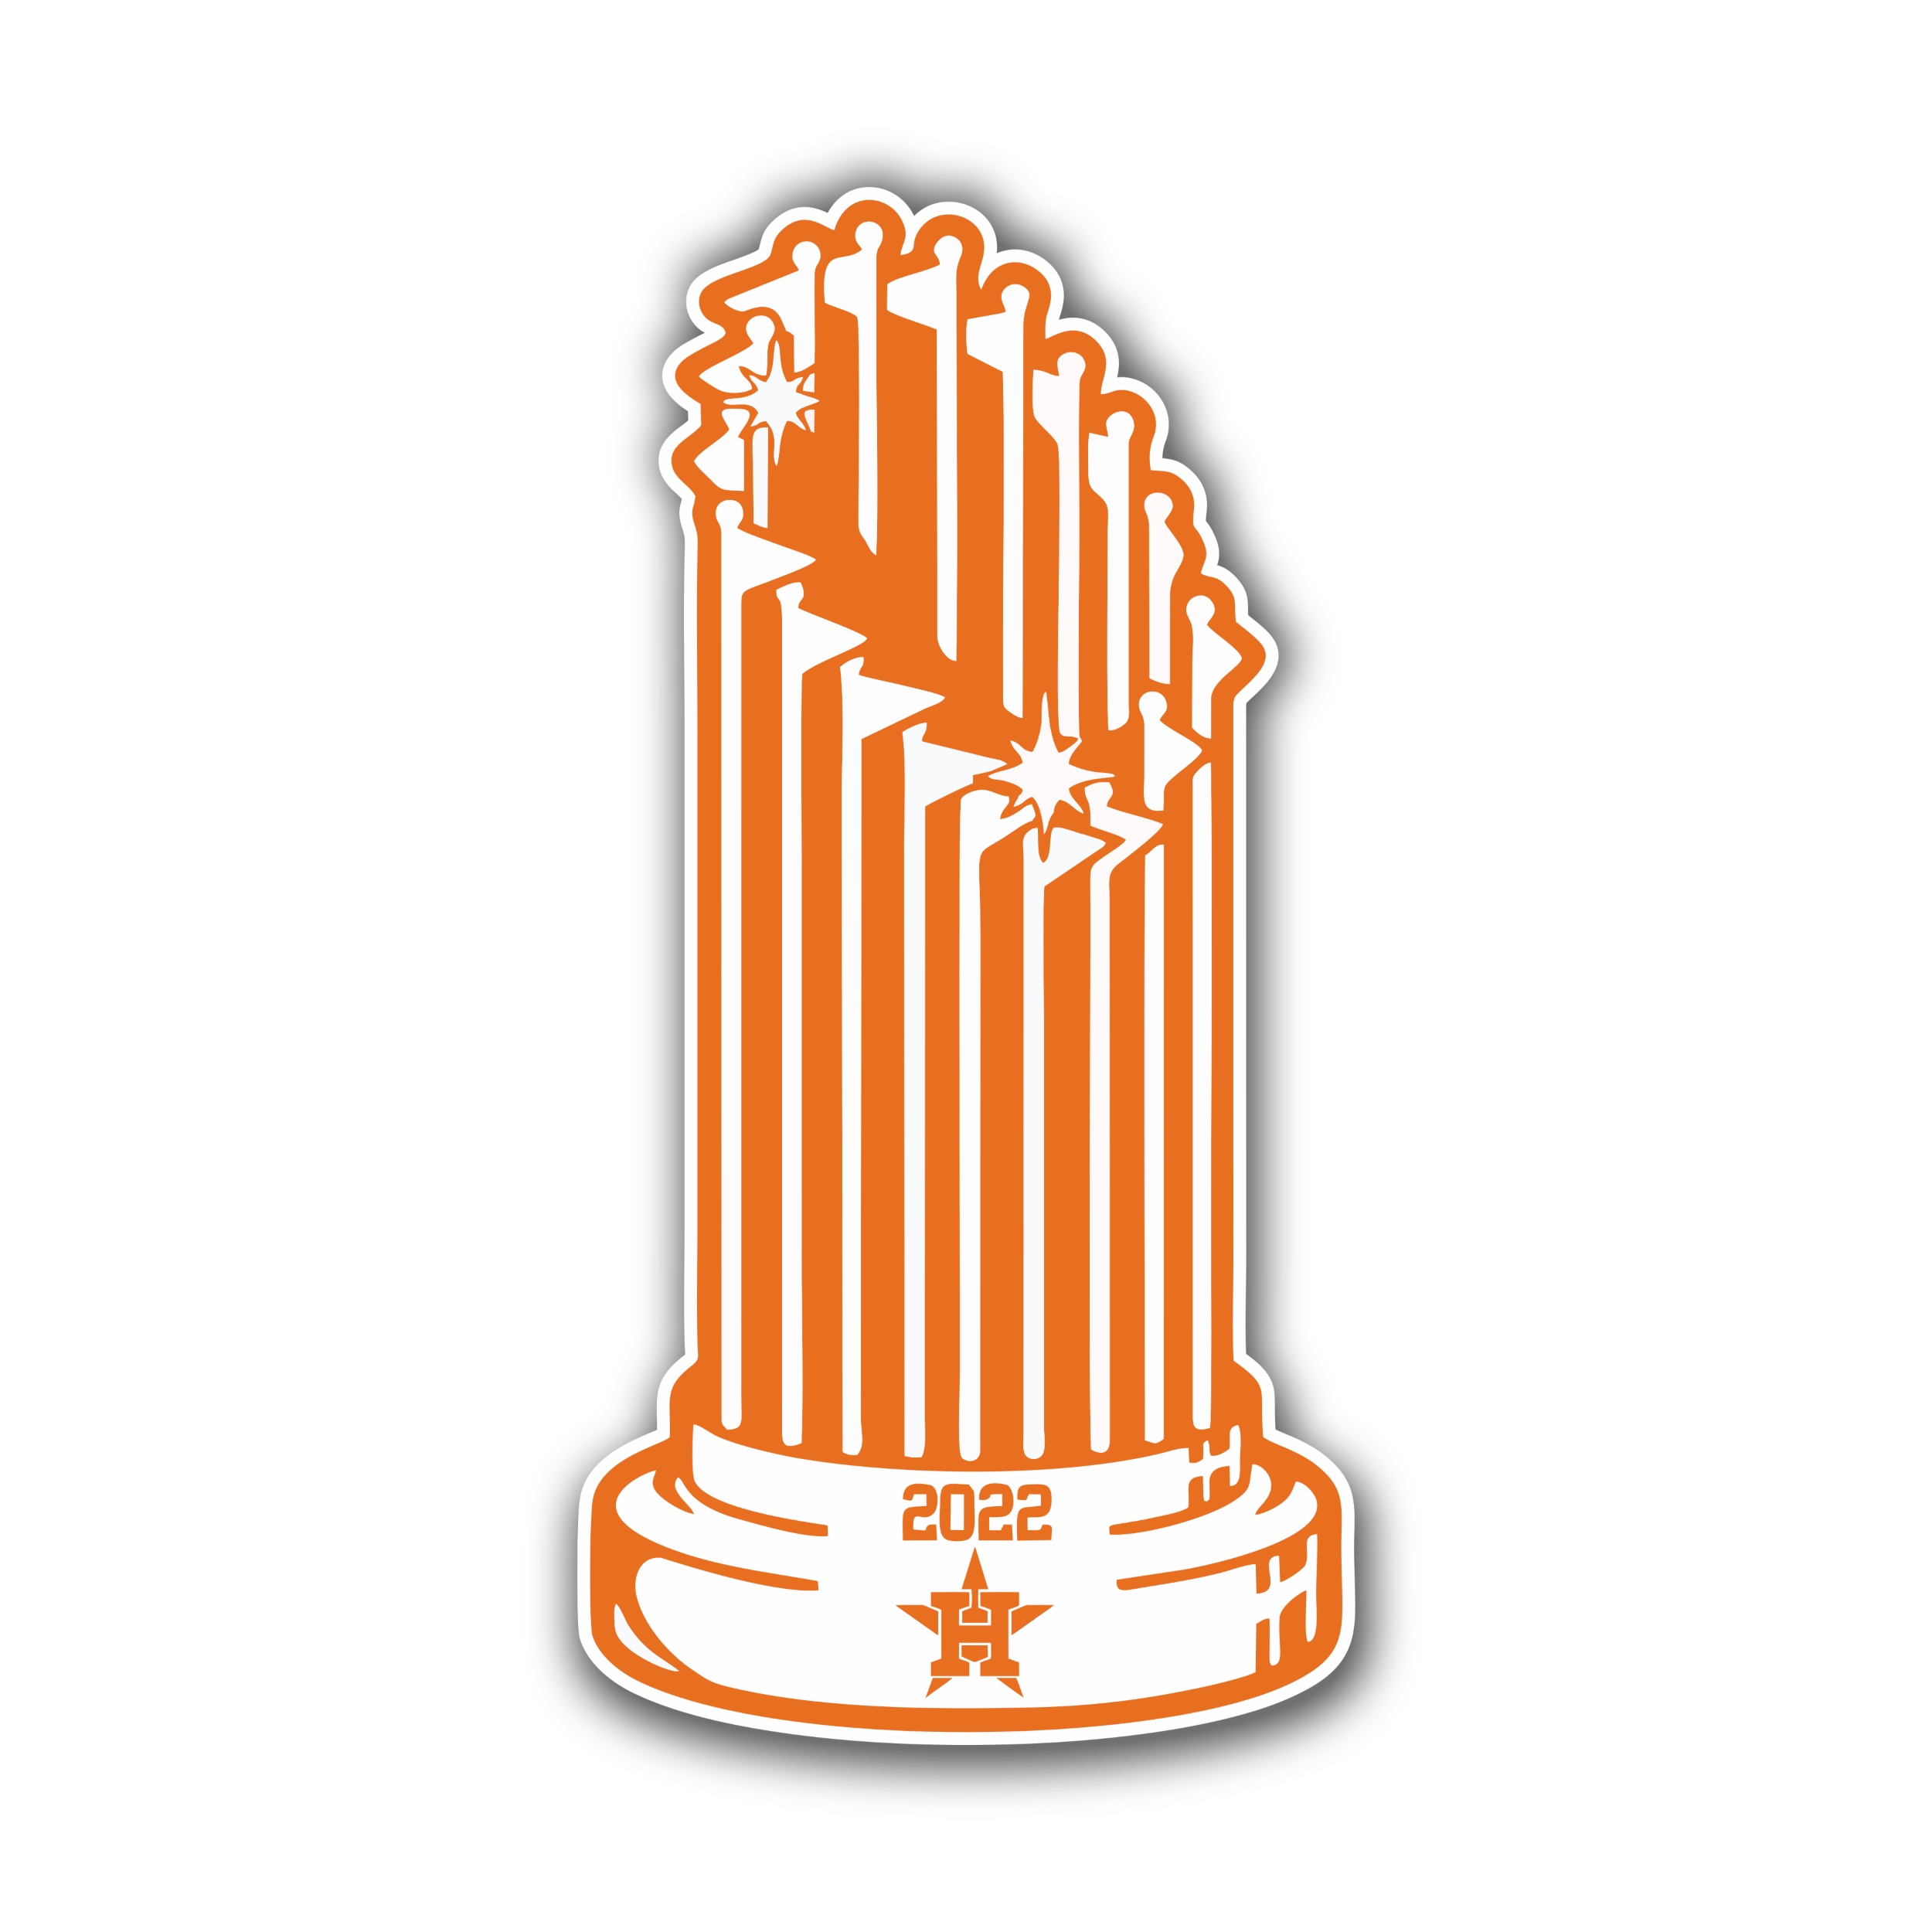 Houston Astros - It's in the details. 🏆